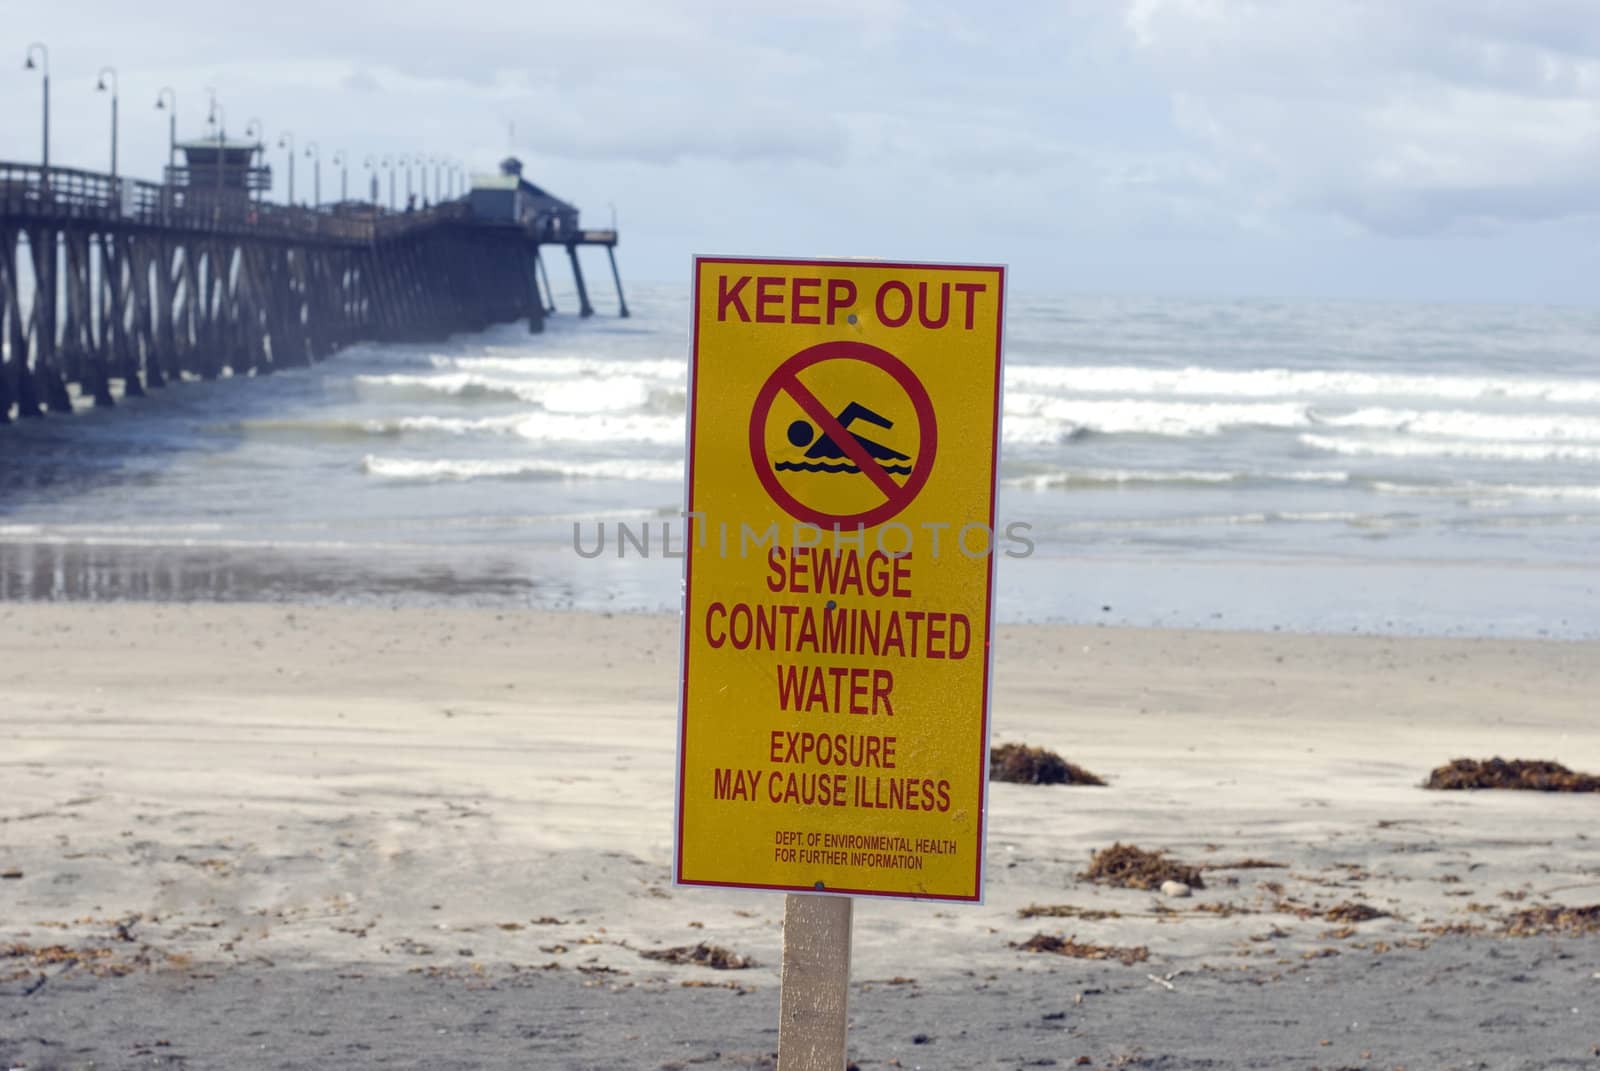 A warning sign for polluted water, Imperial Beach, California